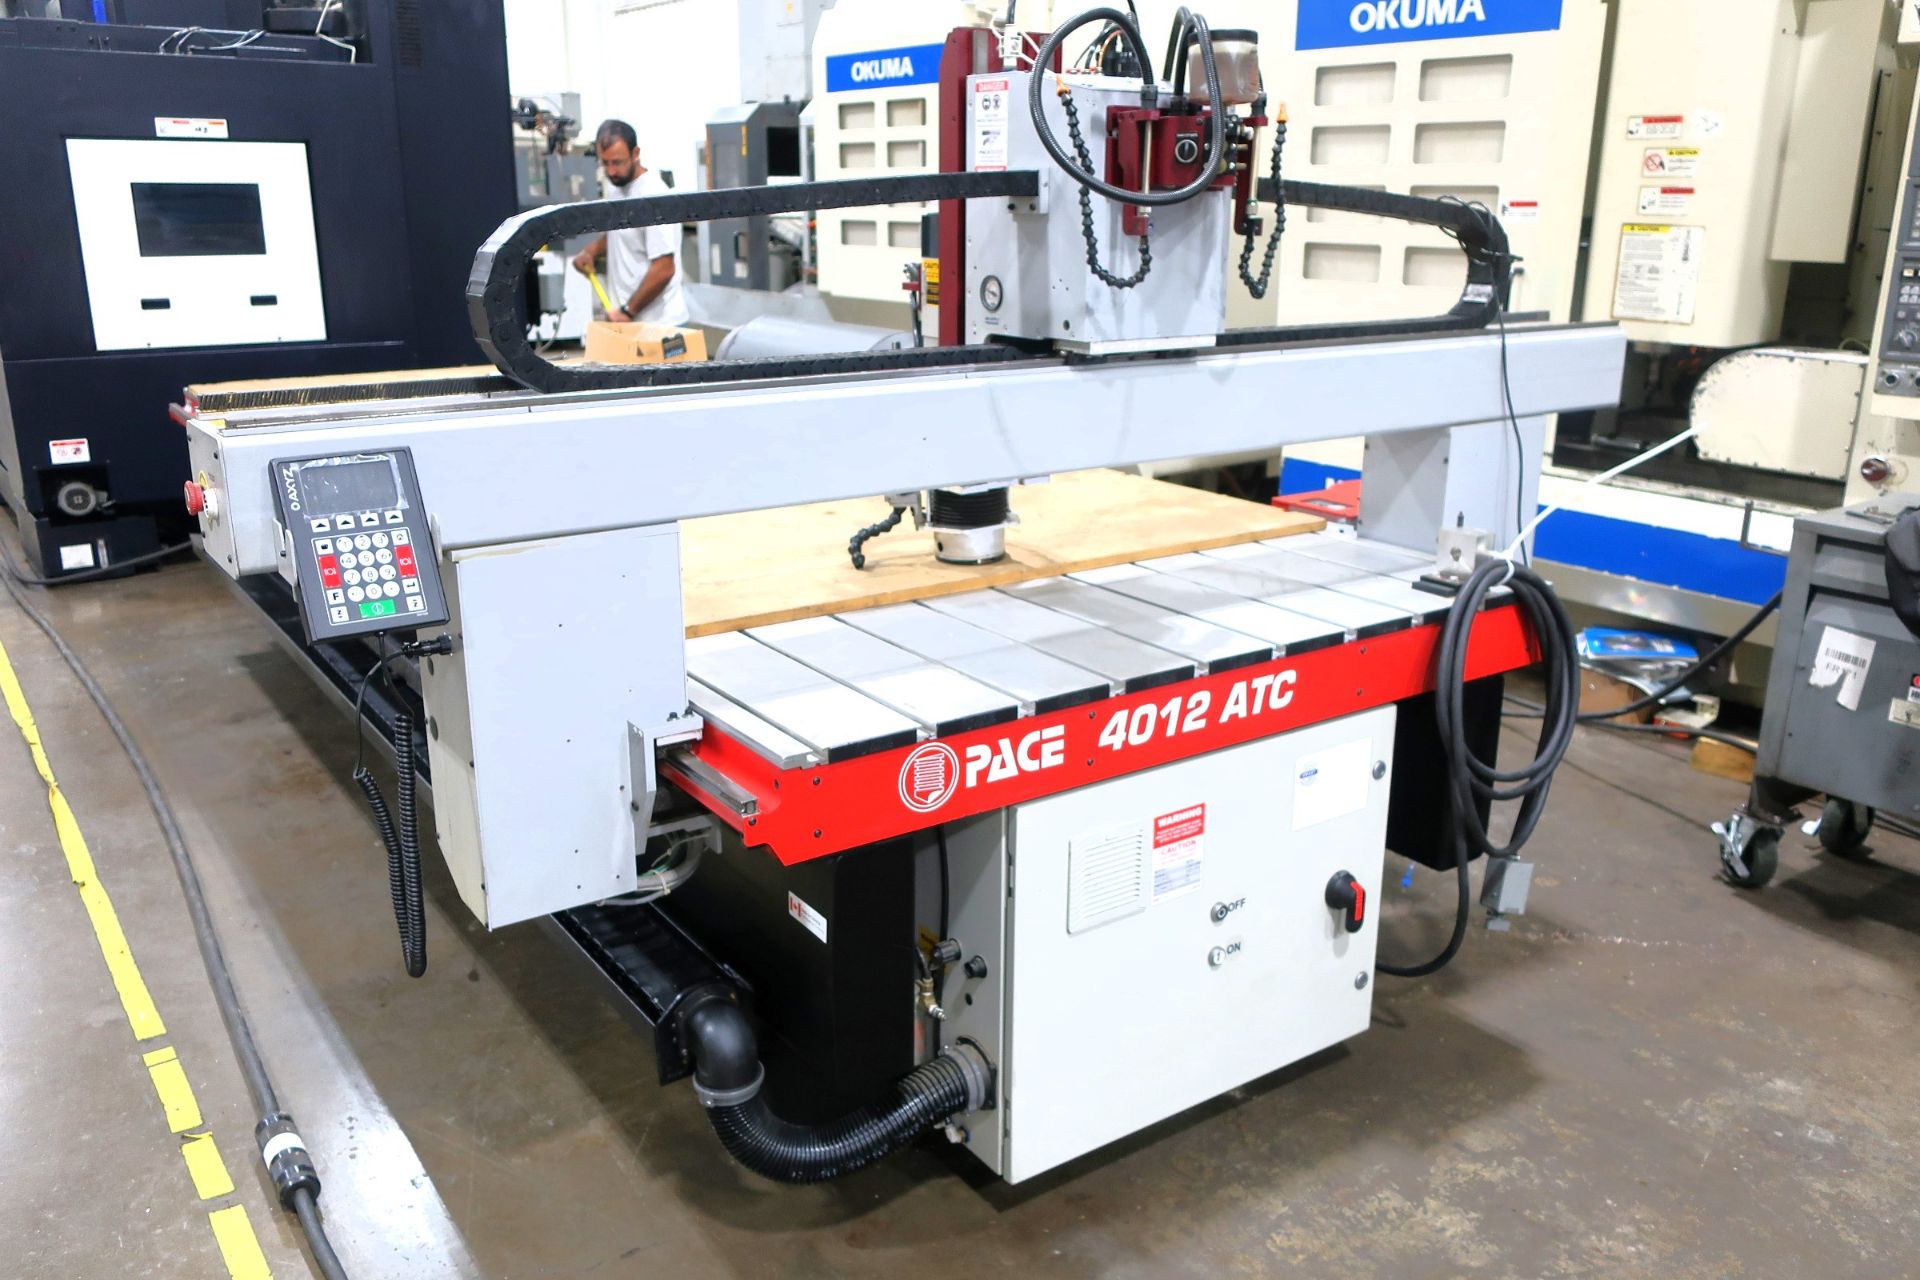 5' X 12' AXYZ PACER 4012 ATC CNC ROUTER, S/N 5390-5280, NEW 2015 - Image 2 of 9